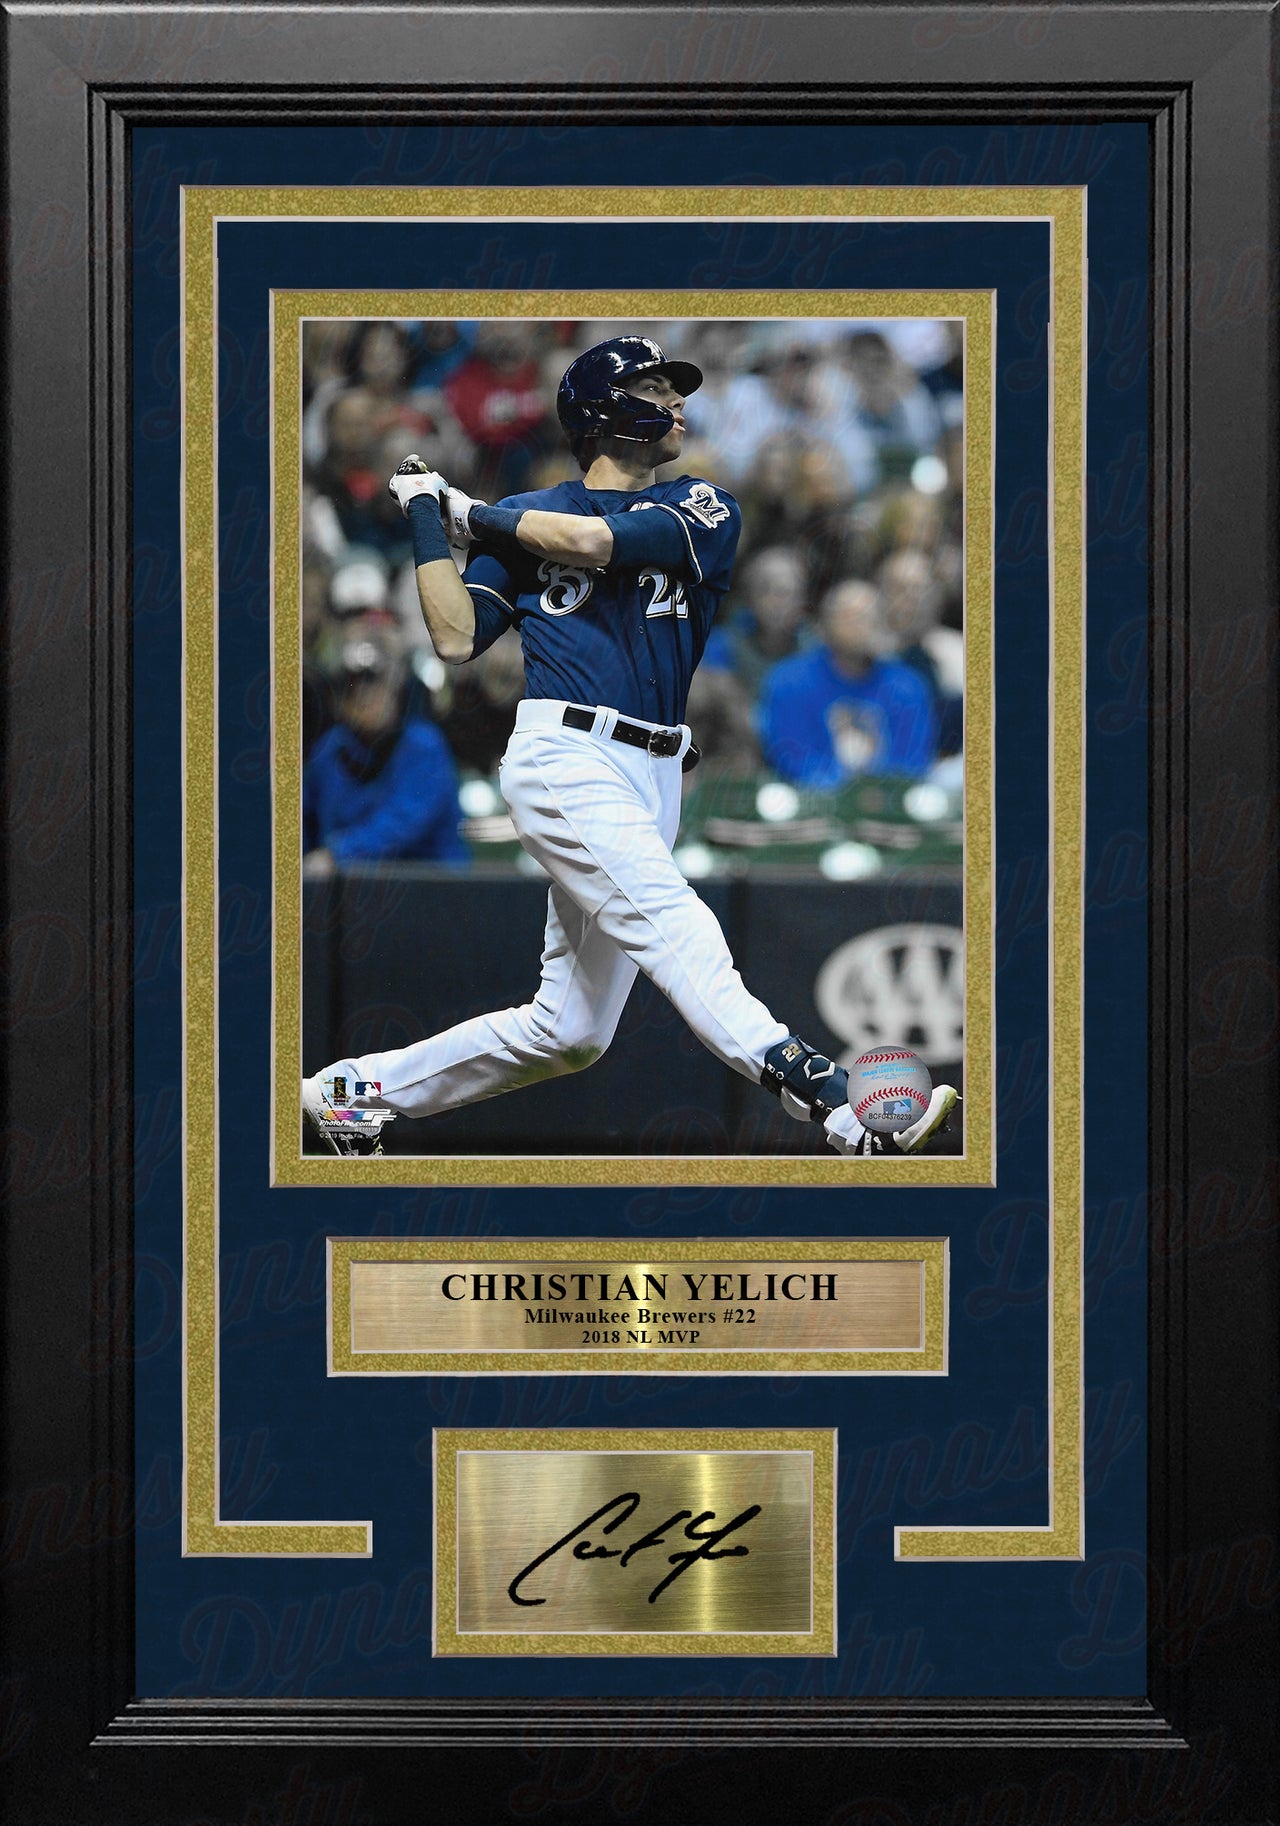 Christian Yelich in Action Milwaukee Brewers 8" x 10" Framed Baseball Photo with Engraved Autograph - Dynasty Sports & Framing 